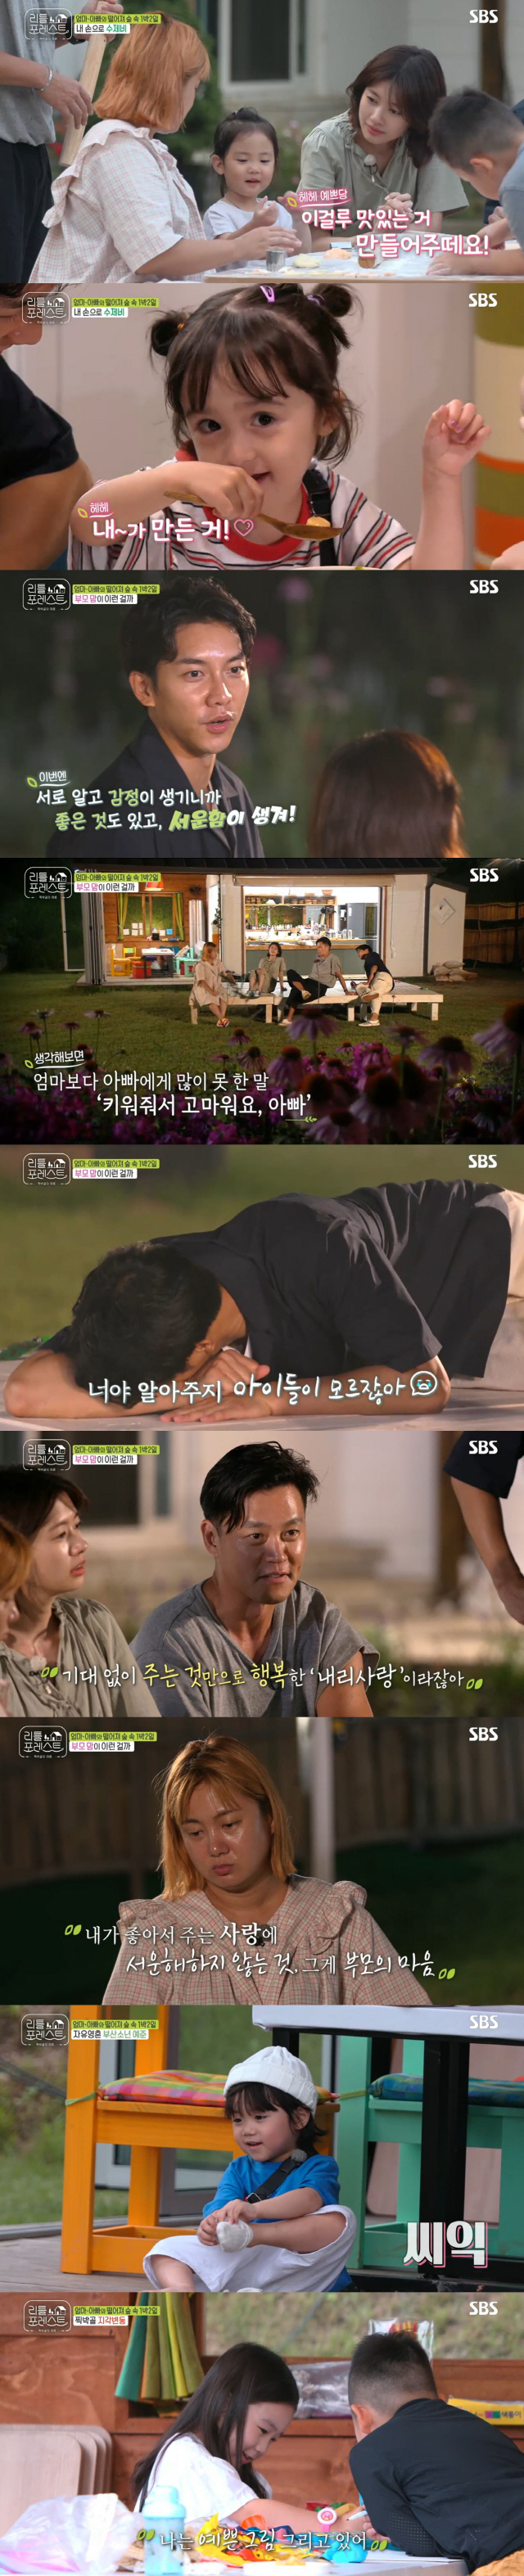 Members of SBS Wolhwa Entertainment Little Forest sympathized with their parents in the second parting.On the show, a second breakup with Littles and a third meeting with two new friends were drawn; after a watering at Valley, Lee Hyun, Brooke and Grace fell asleep.Jeong Han, Lee Han, had a romantic time talking about his rising up with his uncle Seung-gi and the sky.Lee Seung-gi said, I think of Kongbijijige, while Jung Han-yi said, Popcorn comes up, and Lee Han-yi said, It is a Dracula shape.Meanwhile, Lee Seo-jin prepared Sujebi, which utilized the remaining white soup, as a lunch menu; Little also added fern hand and participated in making Sujebi himself.Littles were interested in the strange touch and shot hearts and star-shaped Sujebi.The thick chicken soup Sujebi was completed and the little ones started to eat more deliciously with the pride that they made it themselves.However, Lee Han-yi was unable to eat unlike usual due to his stamina, and he got up first and worried about everyone.The second breakup time came with Little. Littles went back to their parents and the members talked.Lee Seung-gi said, I know each other with my children and have feelings, so I have good things, but I feel sad. I thought I did not know my mind.Lee Seo-jin said, Children are love, I like it, so I should not be sorry.The third meeting day at the Tjakbukol was followed. In the third meeting, four-year-old Busan boy Yejuni and six-year-old Gaoni joined.As soon as Ye Jun came, he took off his socks and walked around the ball and showed a free soul.Another new friend, Gaon, greeted the camera vigorously and ran around after the flying butterfly, boasting of his eldest sisters brilliance.Meanwhile, Lee approached the new Friend Gaon, who gave his name to him with a shy gesture and hovered around him.The members said, Lee Han was in love with Gaon in Brook. I was in love.At this time, Brooke appeared, and I wondered how the triangular relationship between the three little people who fell alone would lead.